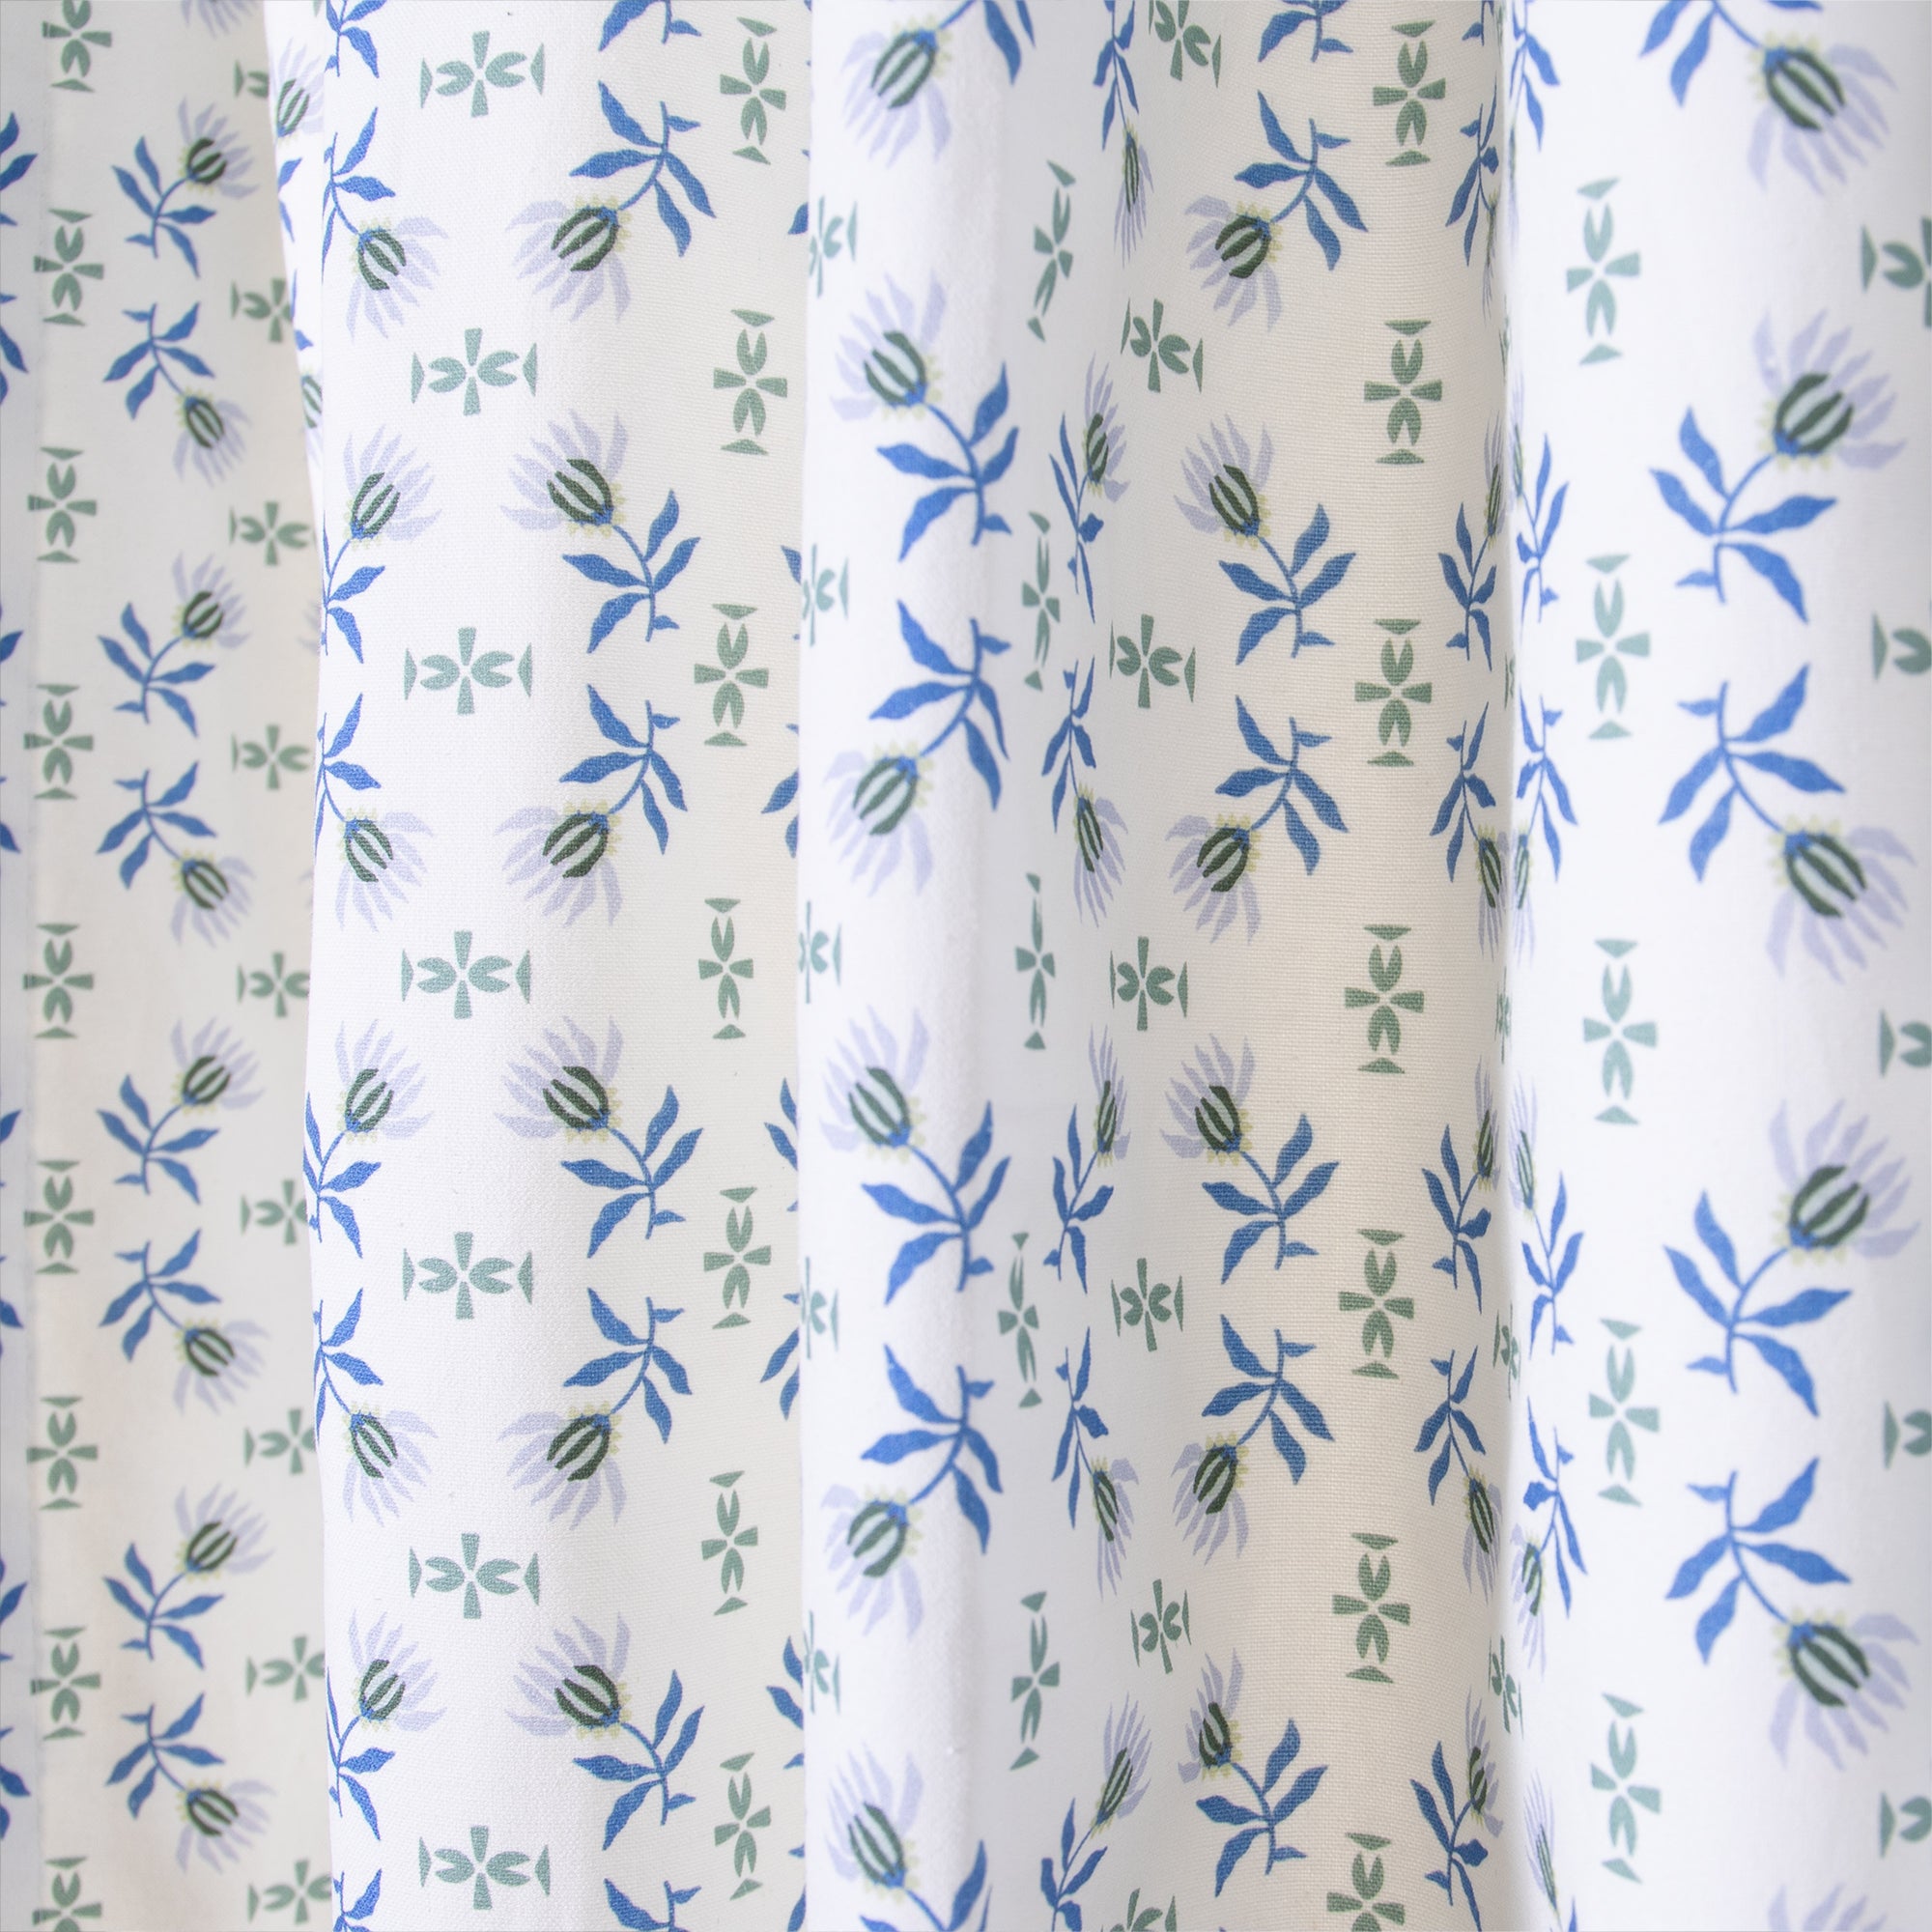 Blue & Green Floral Printed Curtain Close-Up